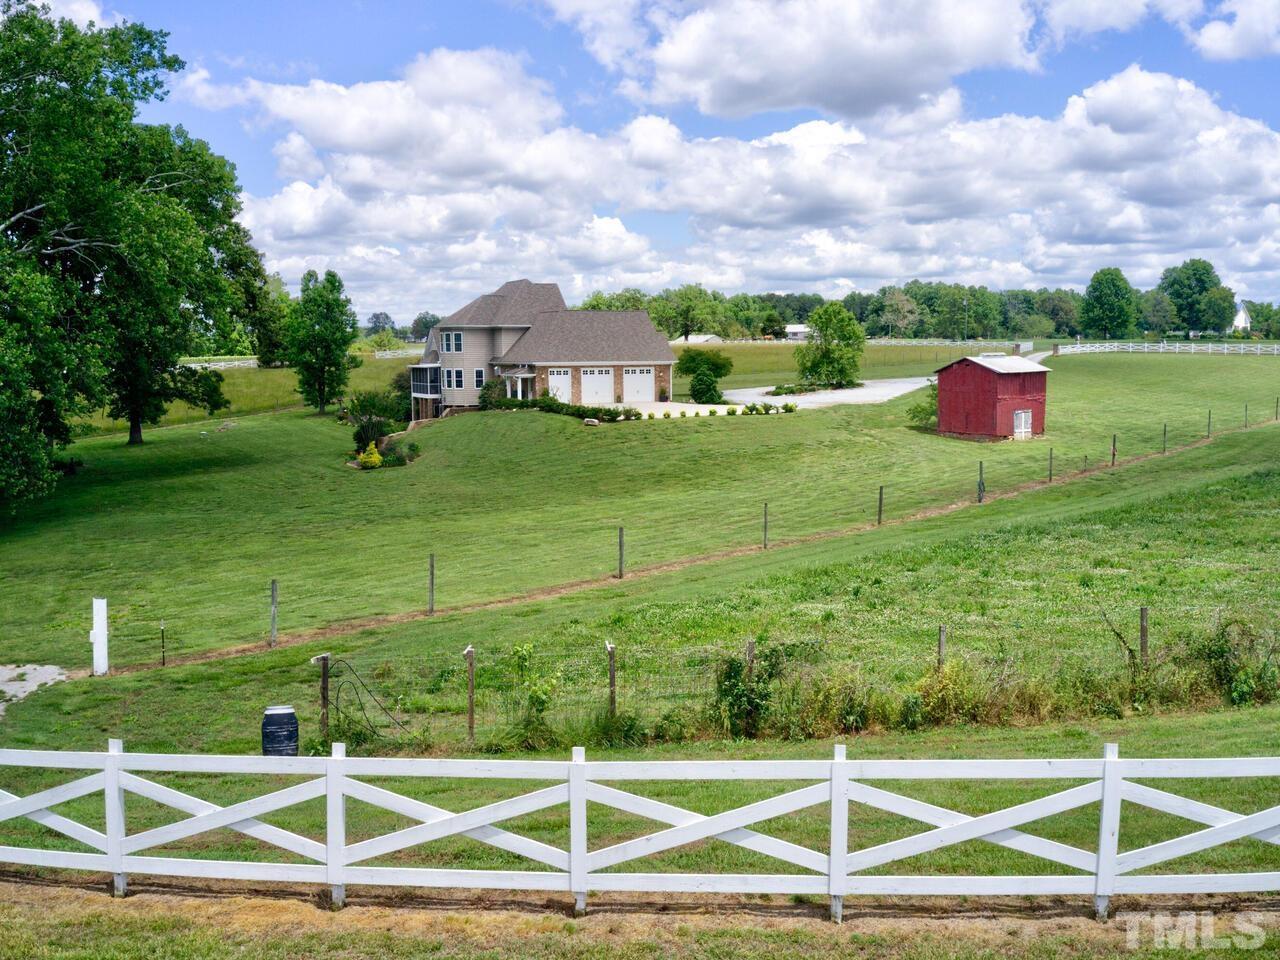 about 15 acres have underground fencing for your pets